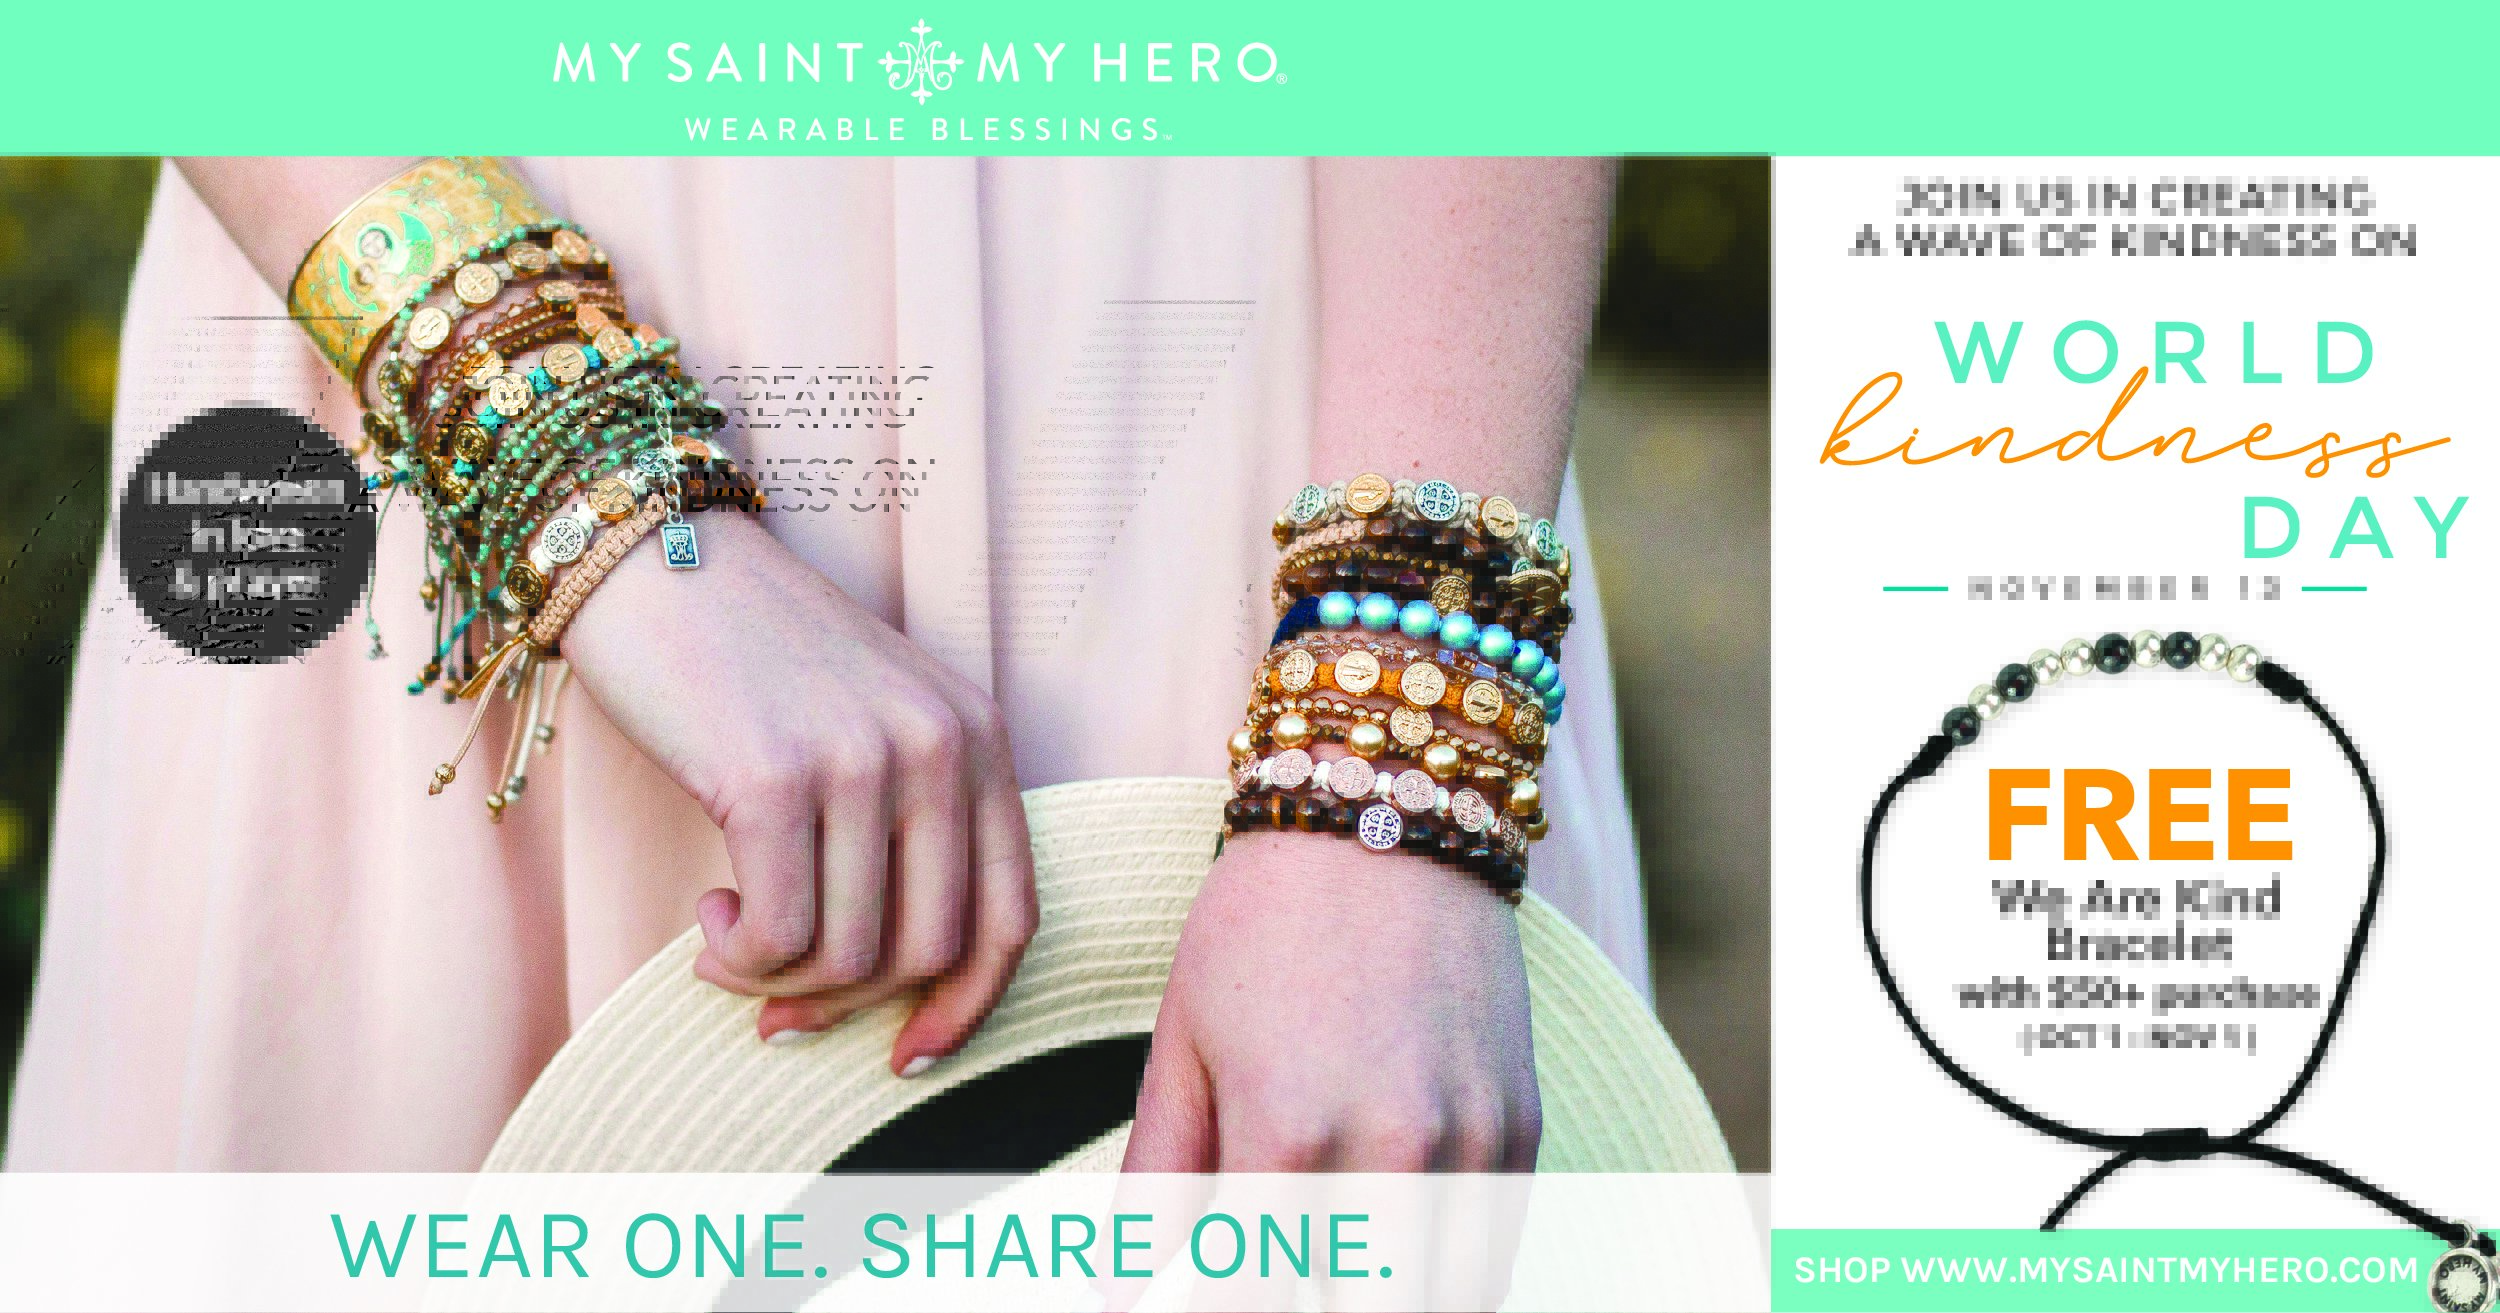 World Kindness Day - Free are kind bracelet with $50 purchase.